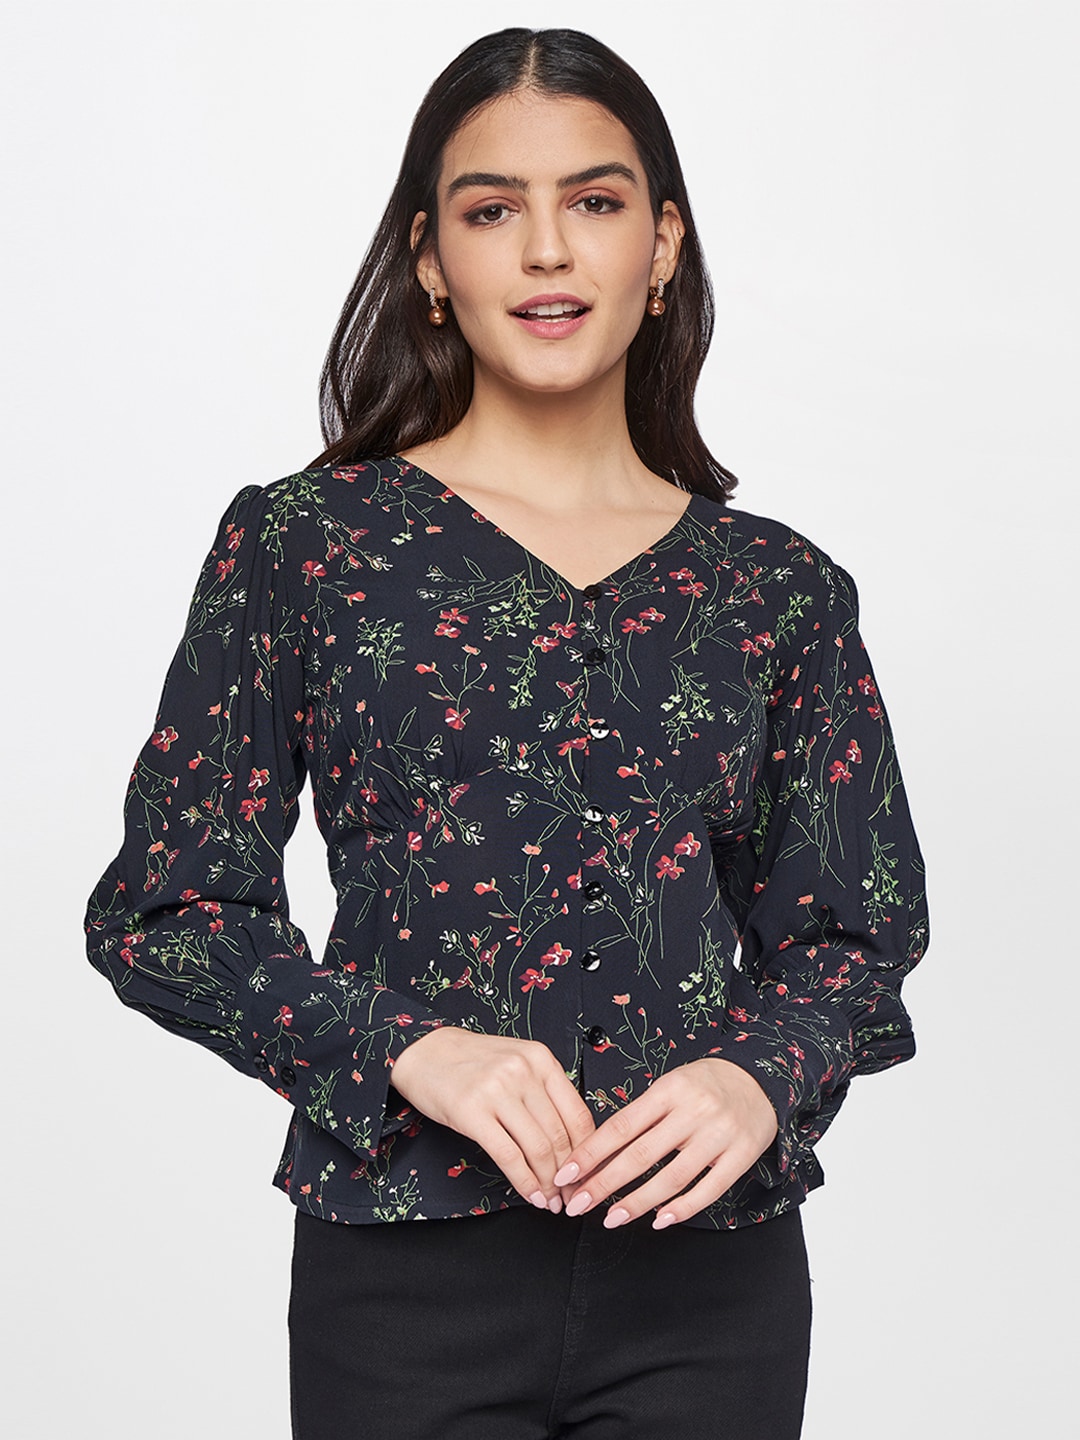 AND Black Floral Print Top Price in India